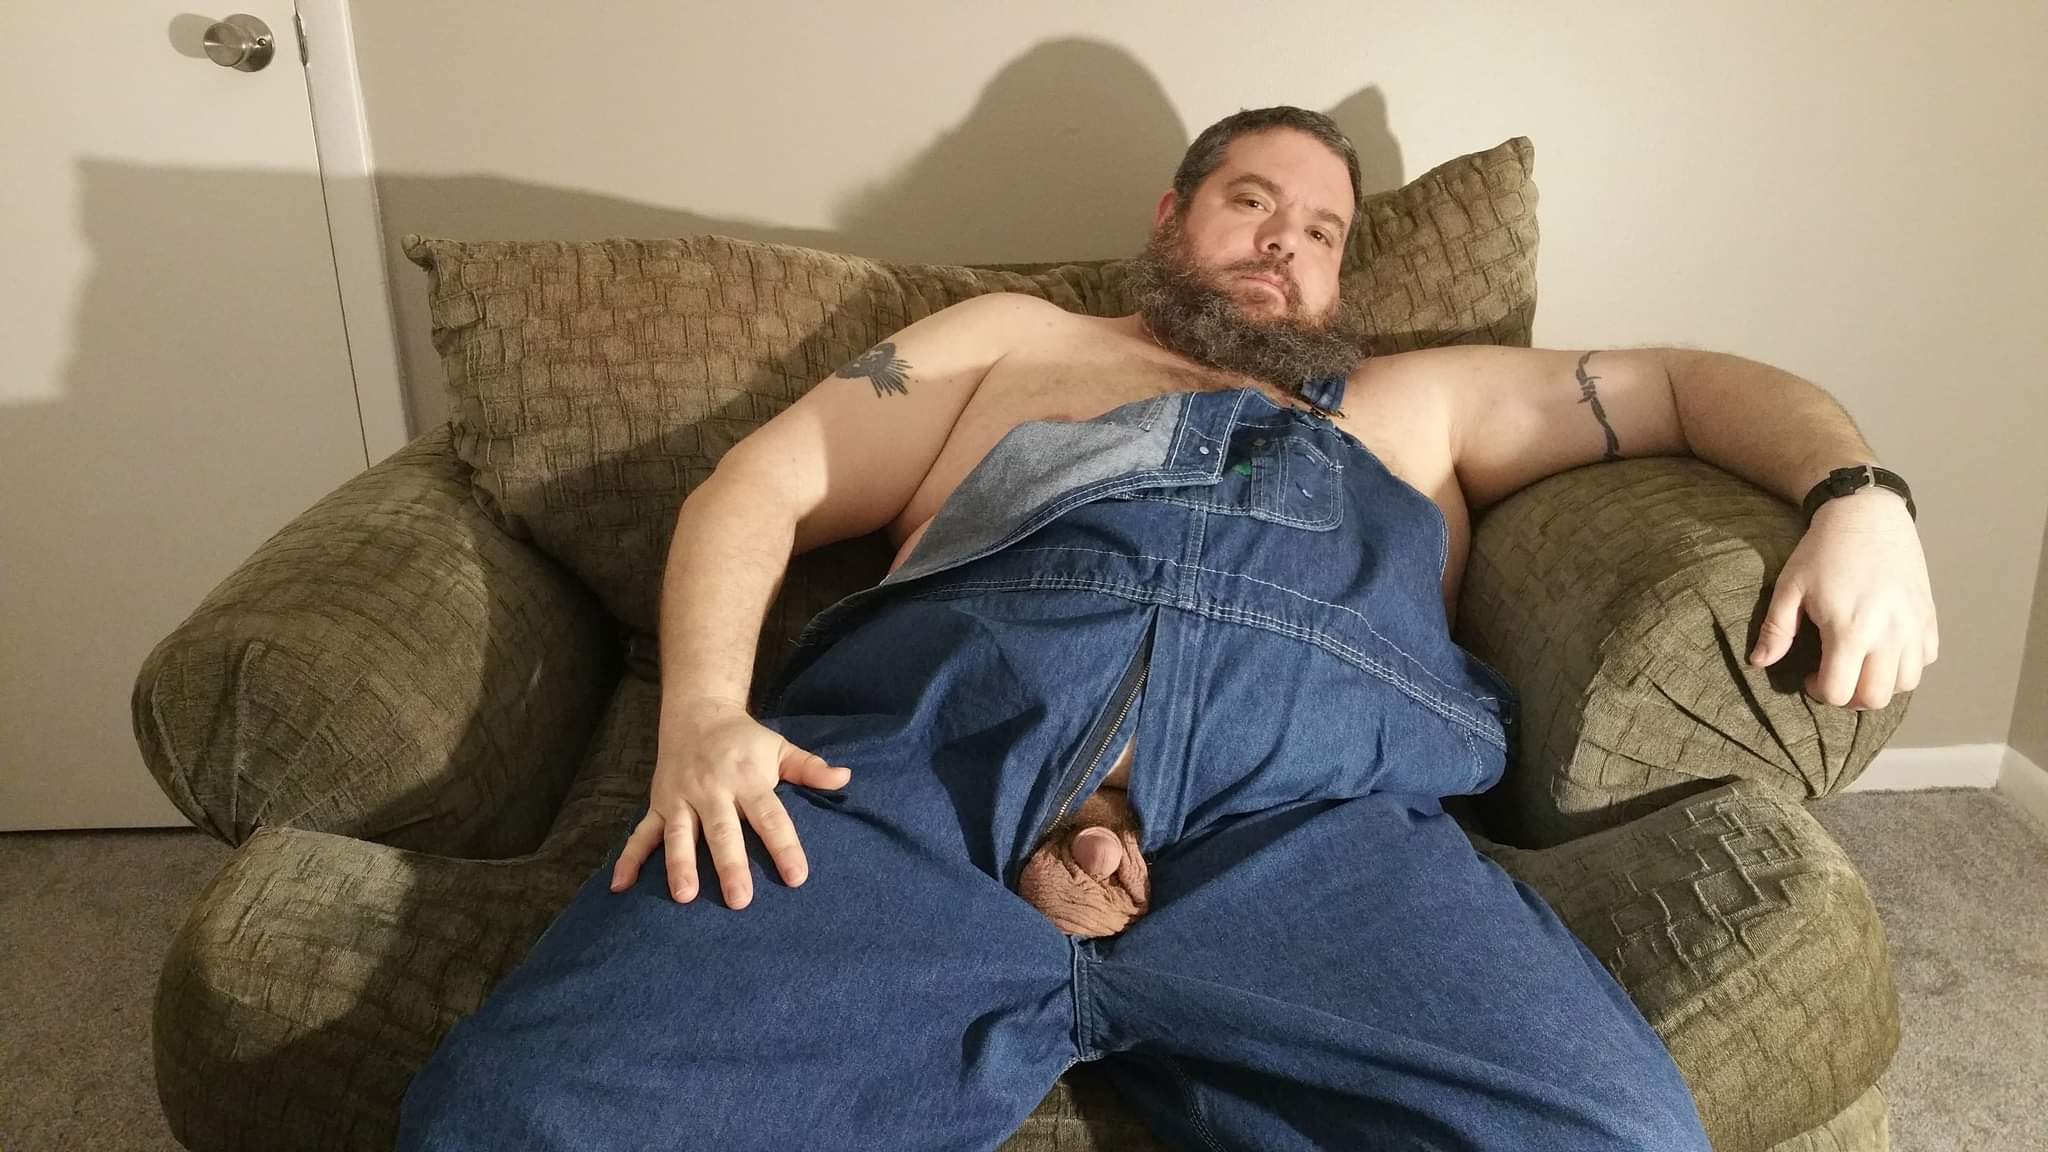 Overalls Porn - Bear Jacks Off In Overalls - ThisVid.com